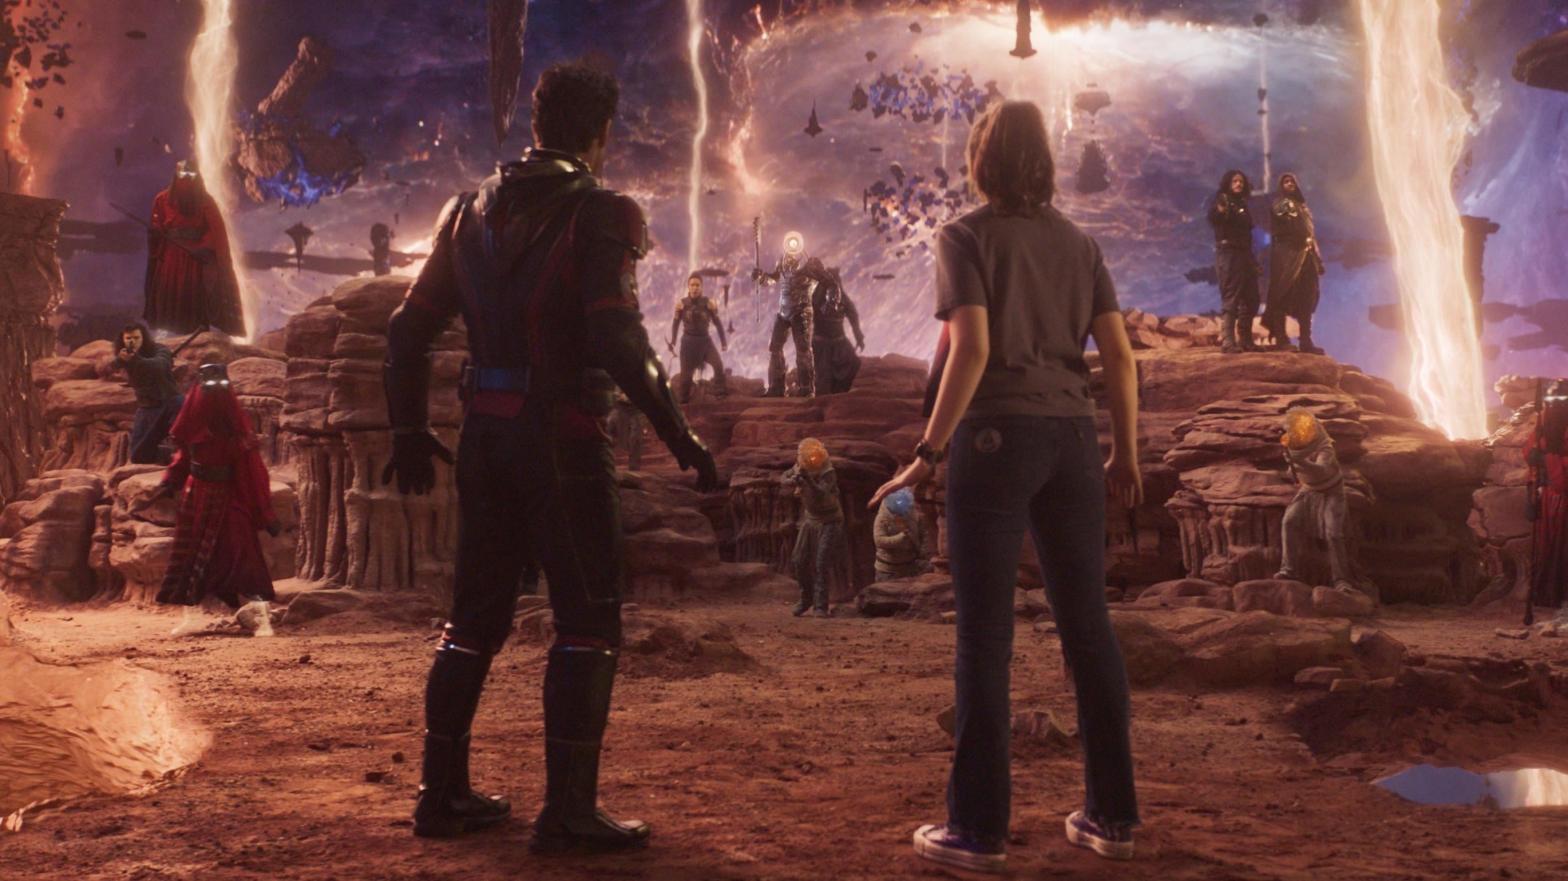 We're about to see the Quantum Realm like never before in Ant-Man and the Wasp: Quantumania. (Image: Marvel Studios)